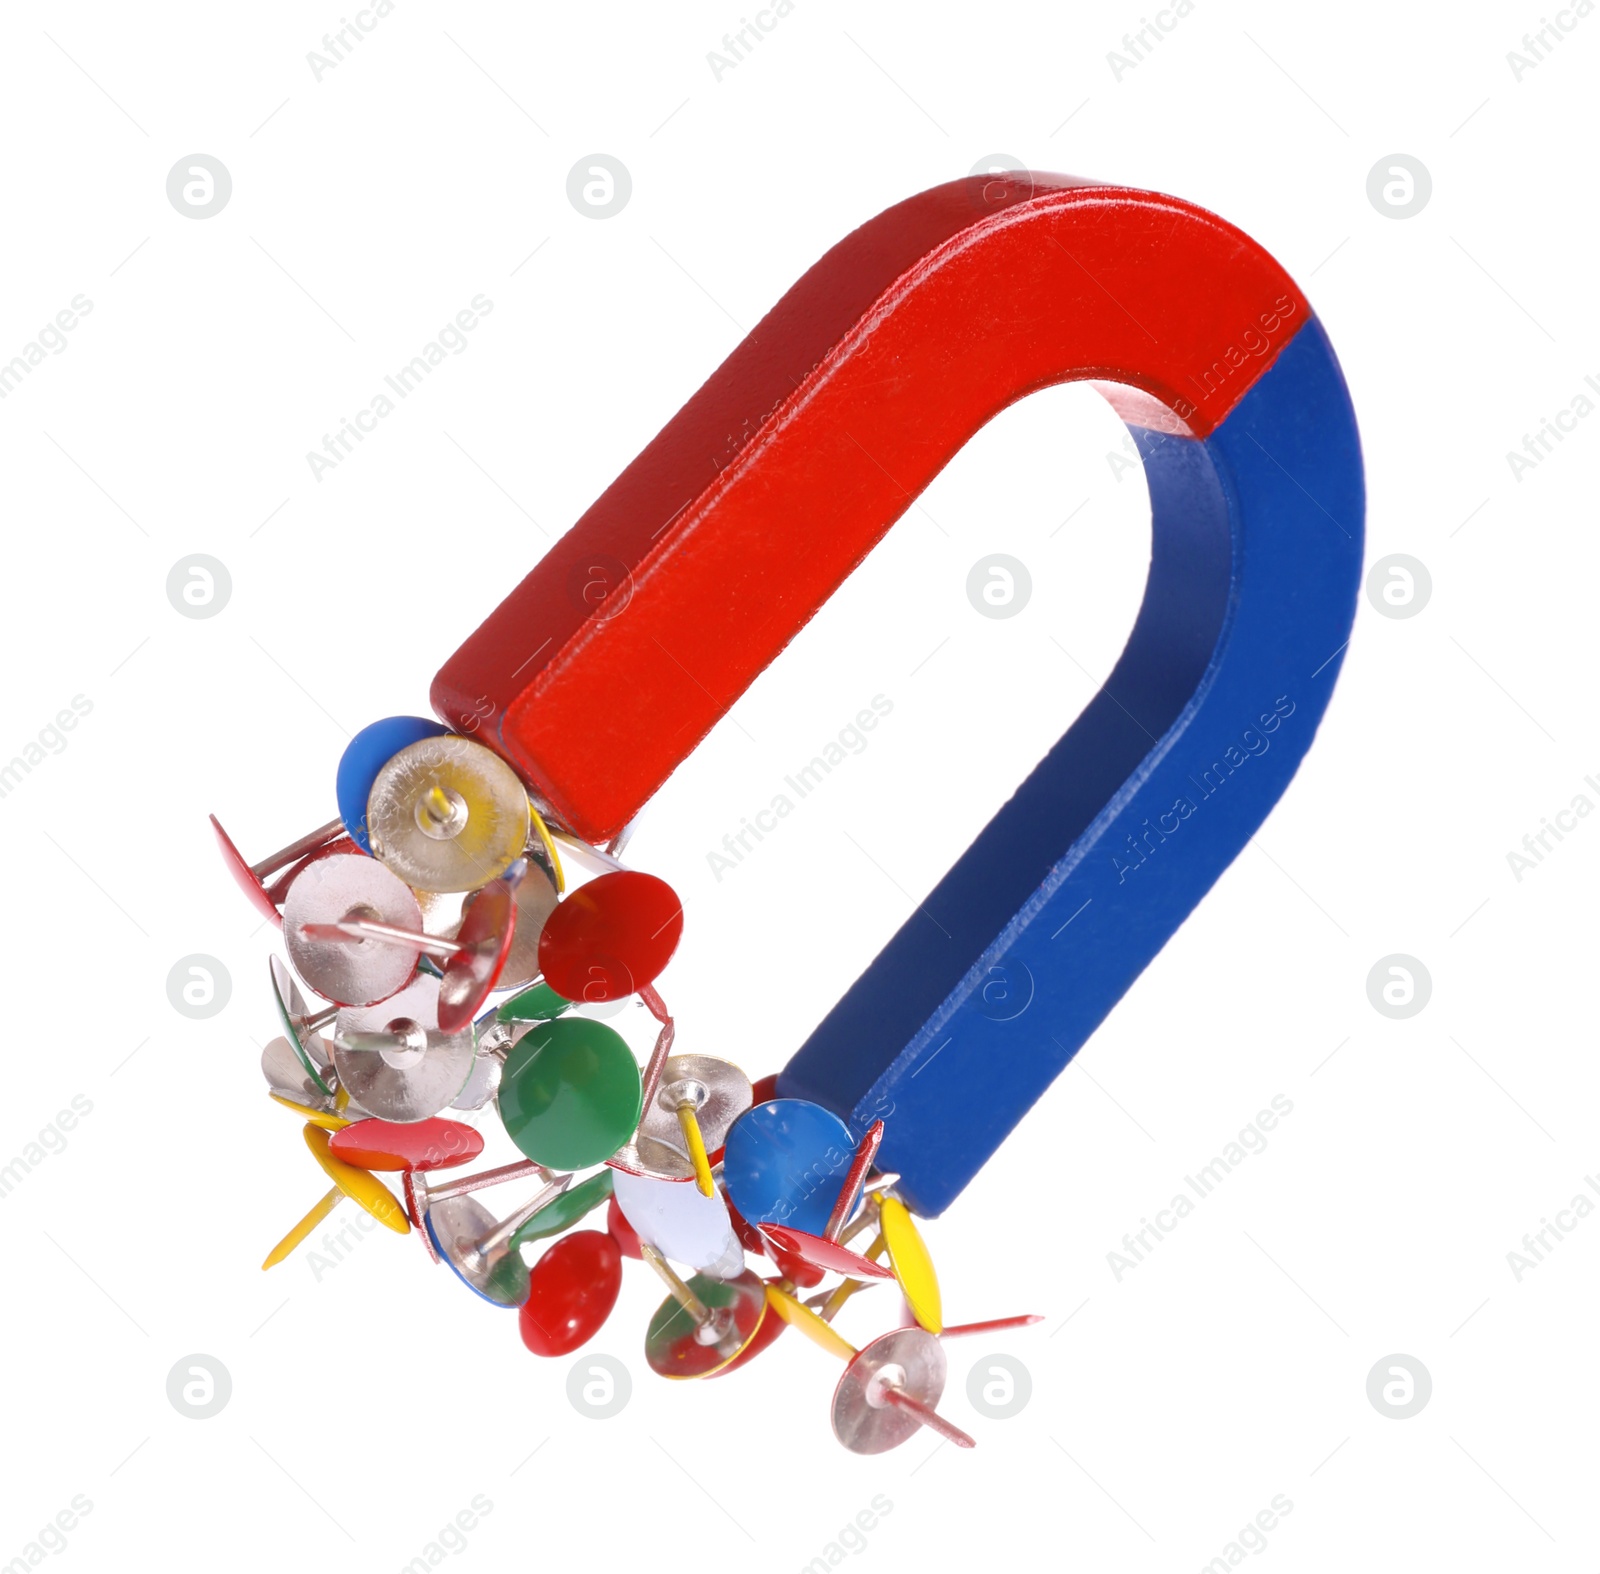 Photo of Horseshoe magnet attracting colorful drawing pins on white background